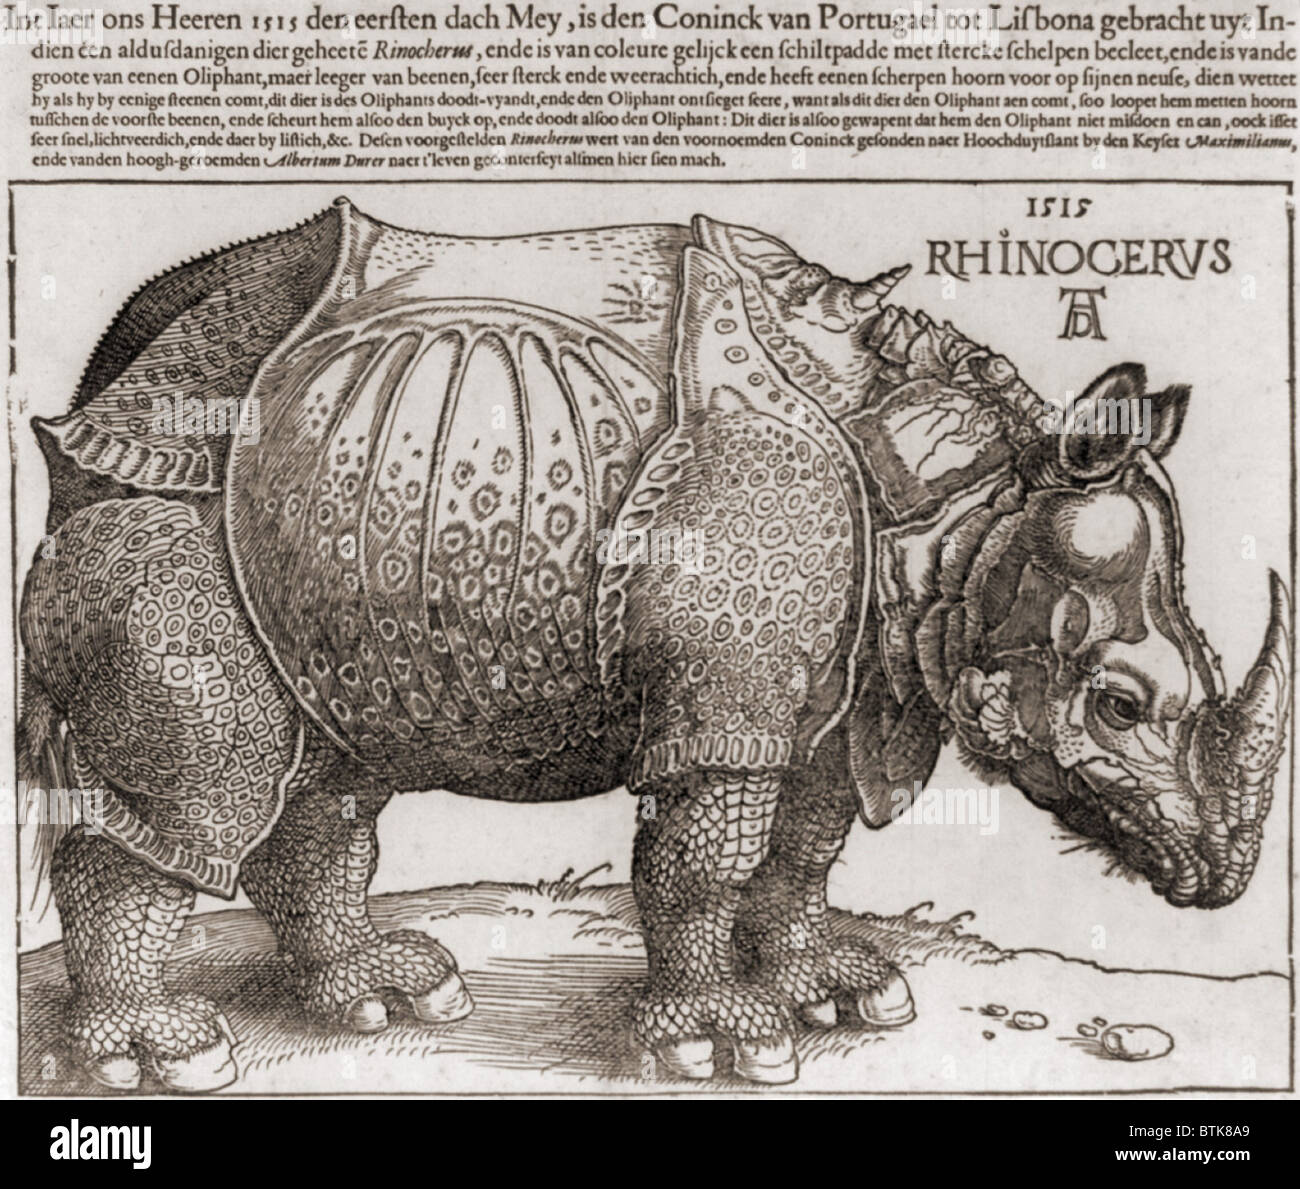 THE RHINOCEROS, Woodcut by Albrecht Durer, (1471-1528), drawn from the description of an Indian rhinoceros. While inaccurate, it was published as the authoritative natural history illustration for the next 300 years. Stock Photo